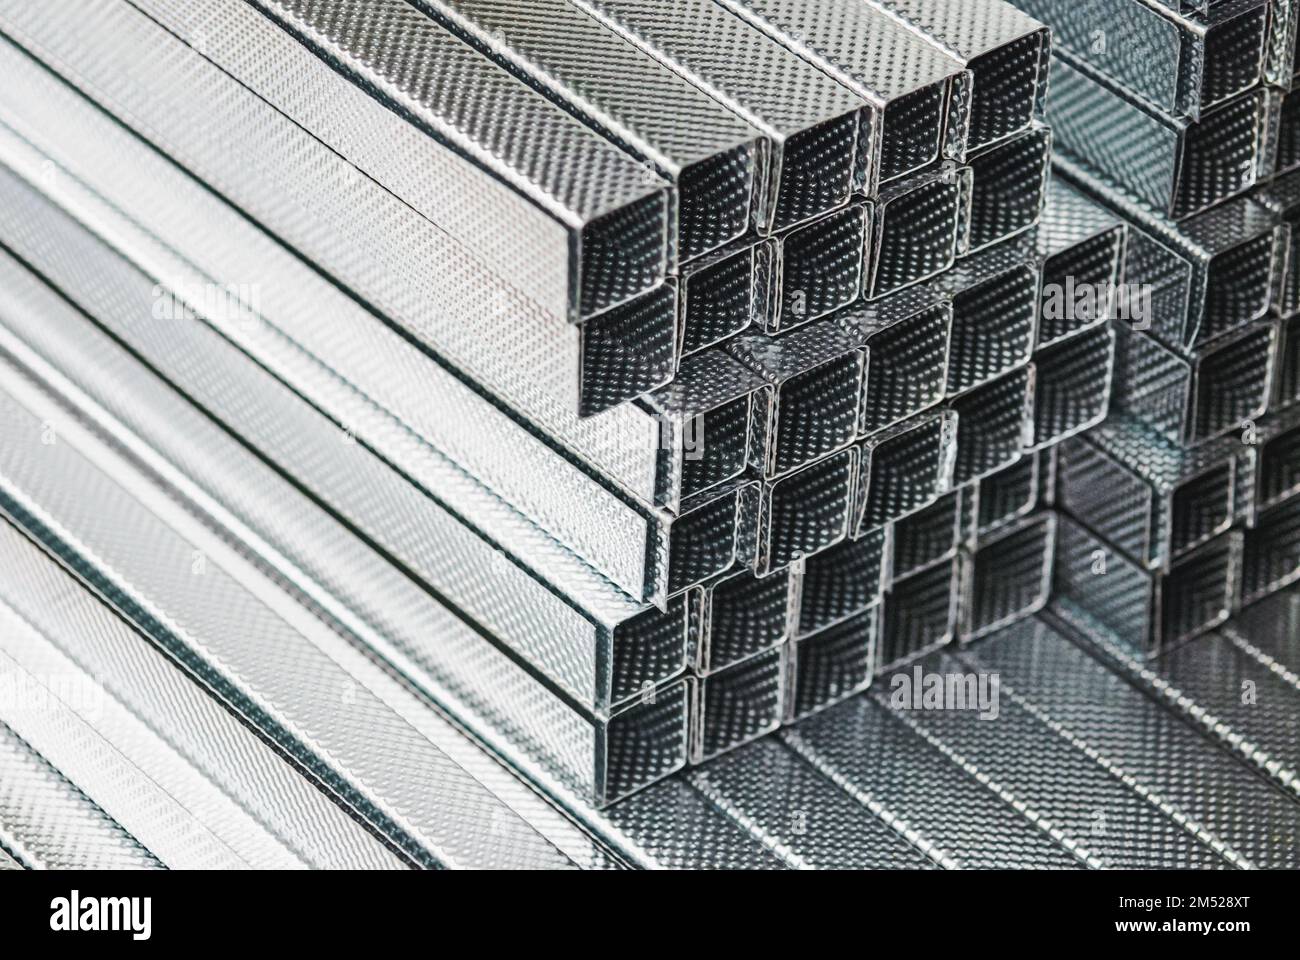 Metal C profile studs for drywall and ceiling construction, corrugated C shaped metal profiles stacked Stock Photo